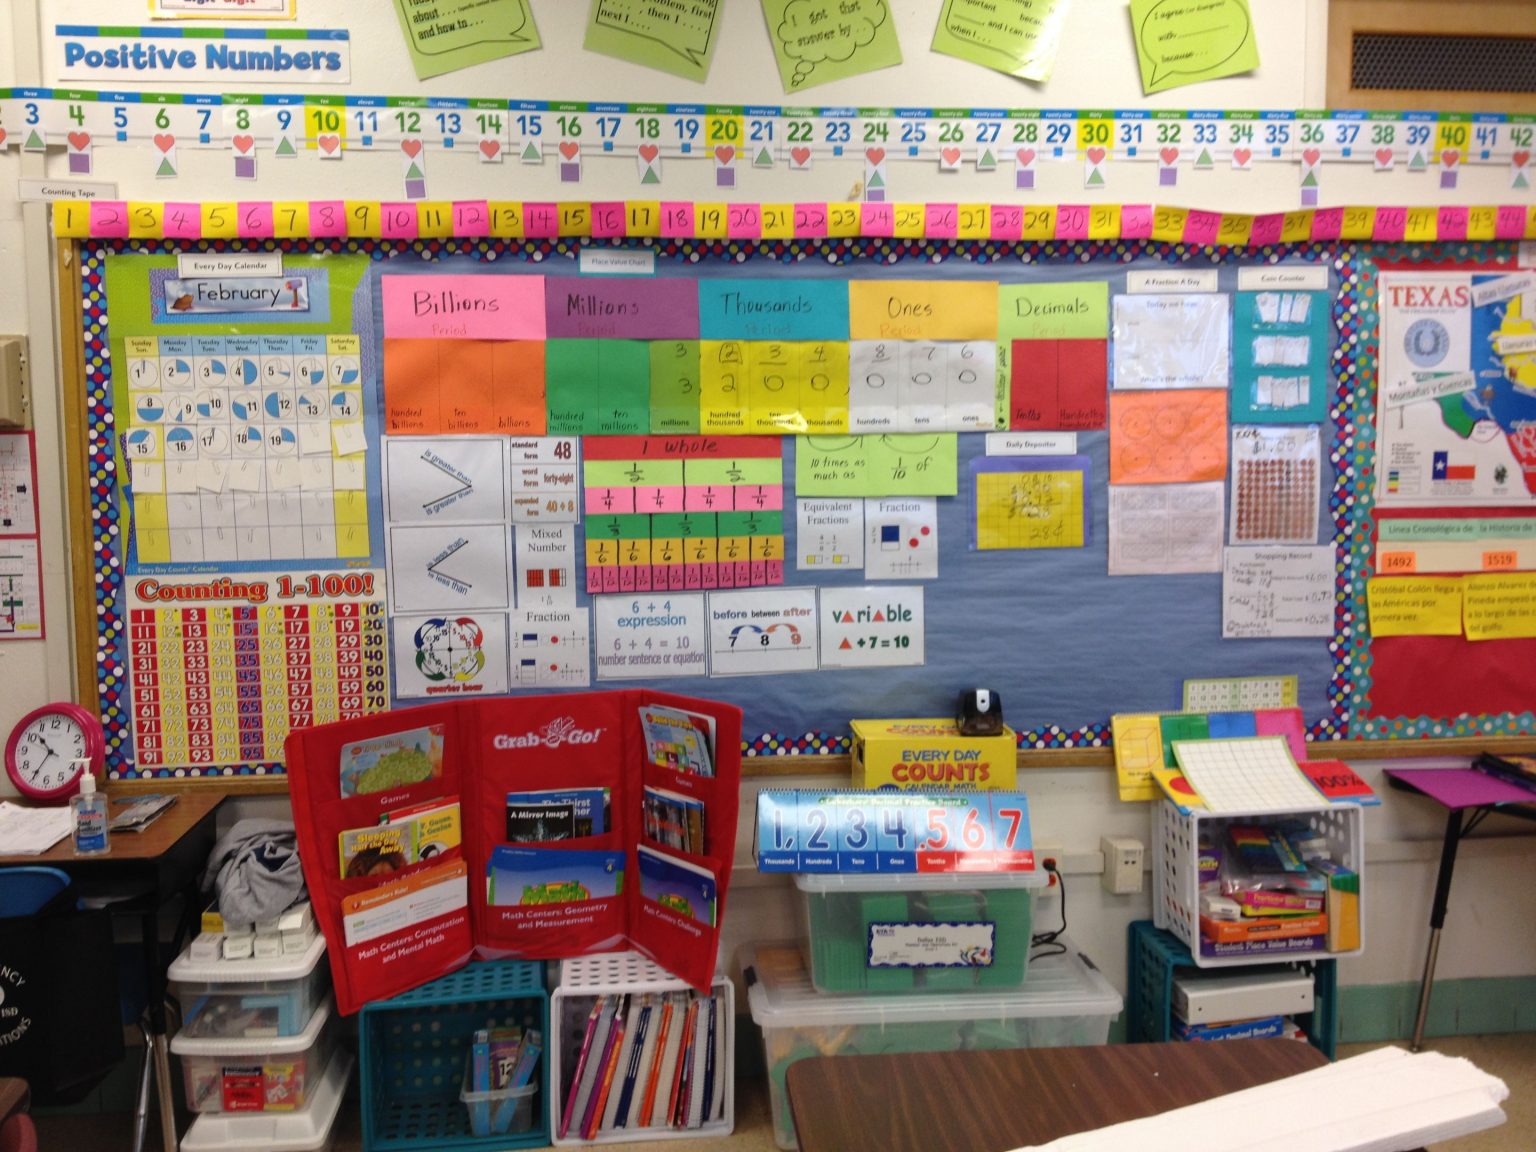 4th-grade-math-board-math-routines-every-day-counts-calendar-template-2023